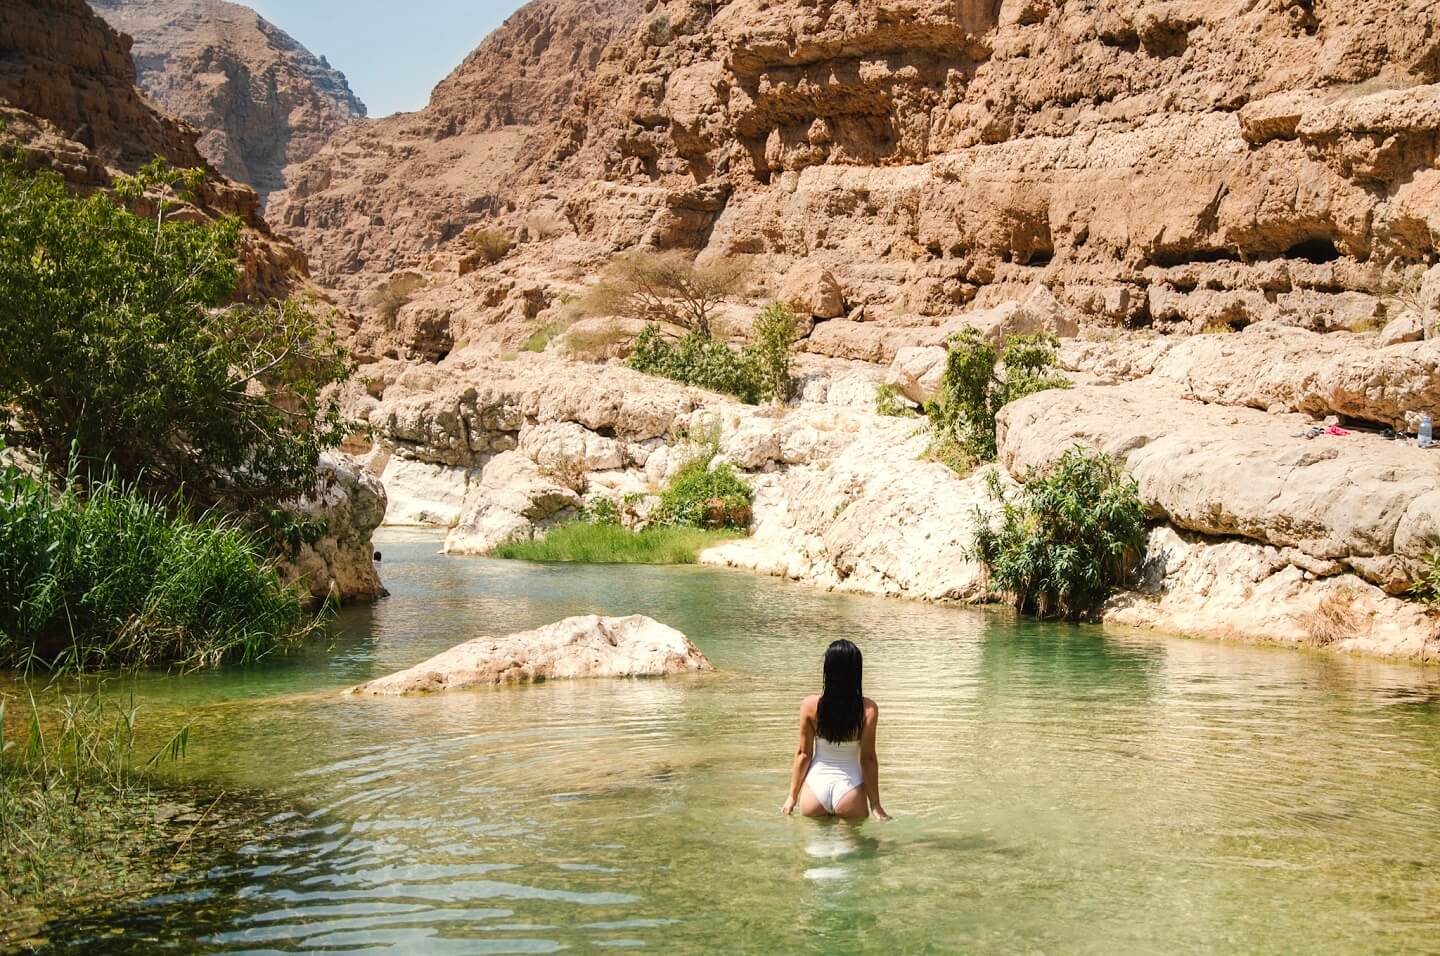 Pool at Wadi Shab one of the top places to visit during Oman road trip